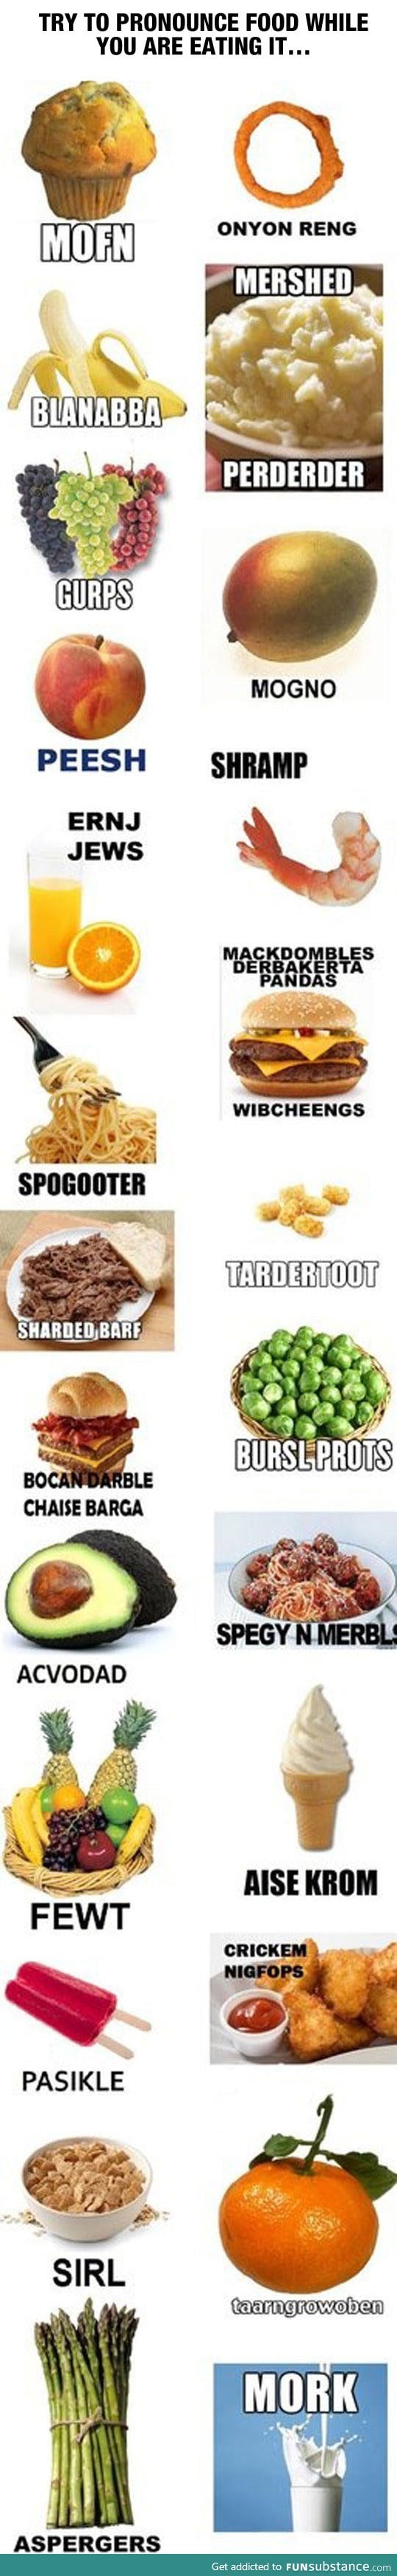 Pronouncing food names while you're eating it